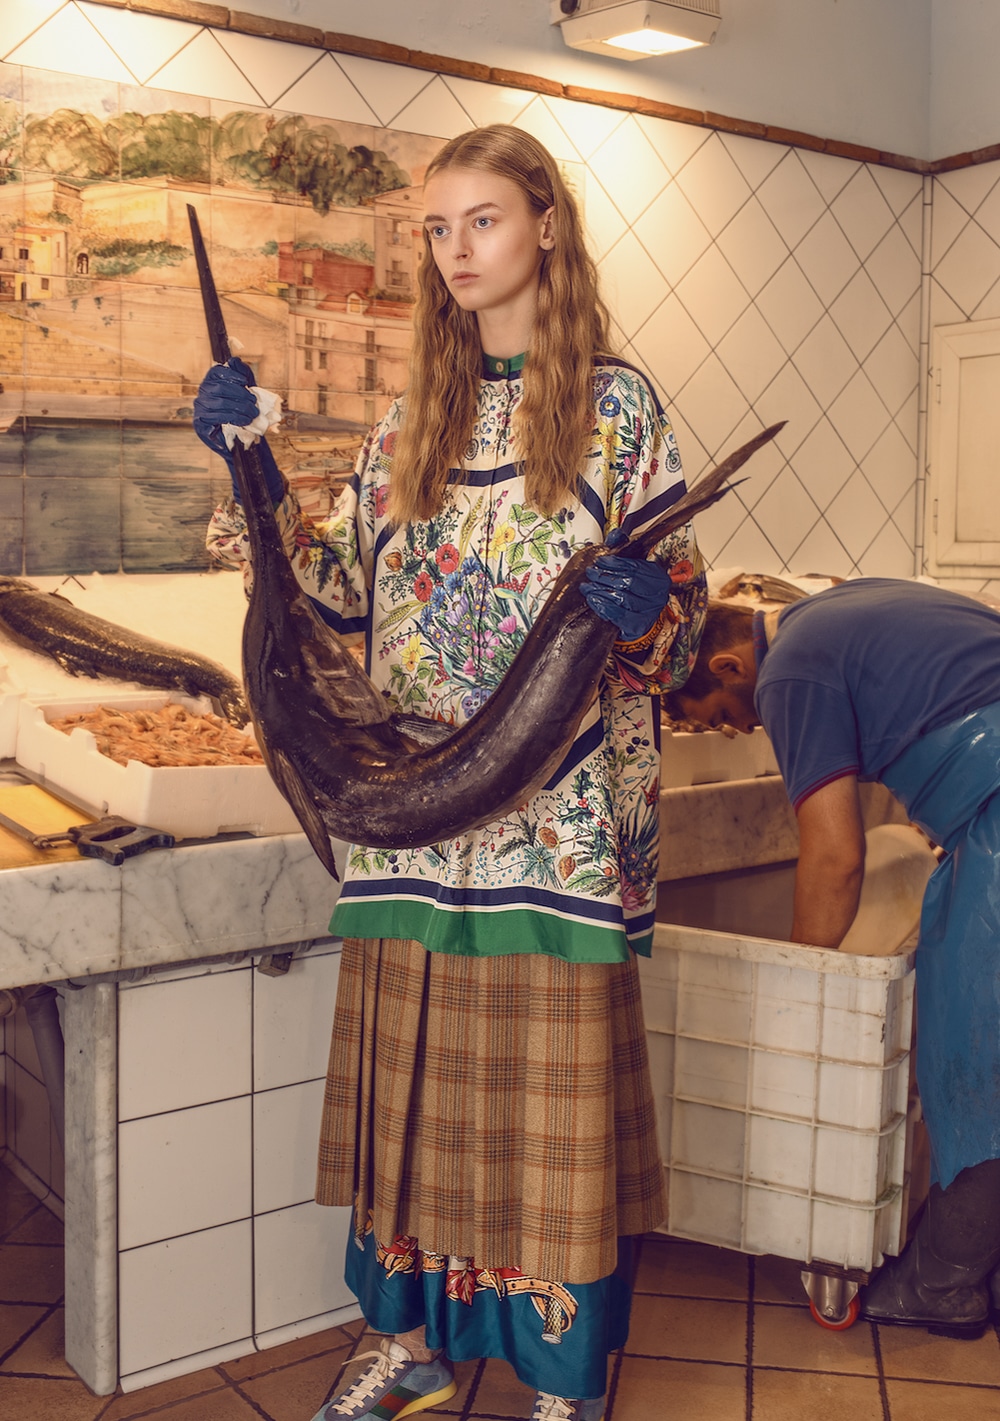 Donatella-Pia-Styled-Gucci-Special-Editorial-Marie-Claire-Hong-Kong-1-3.jpg